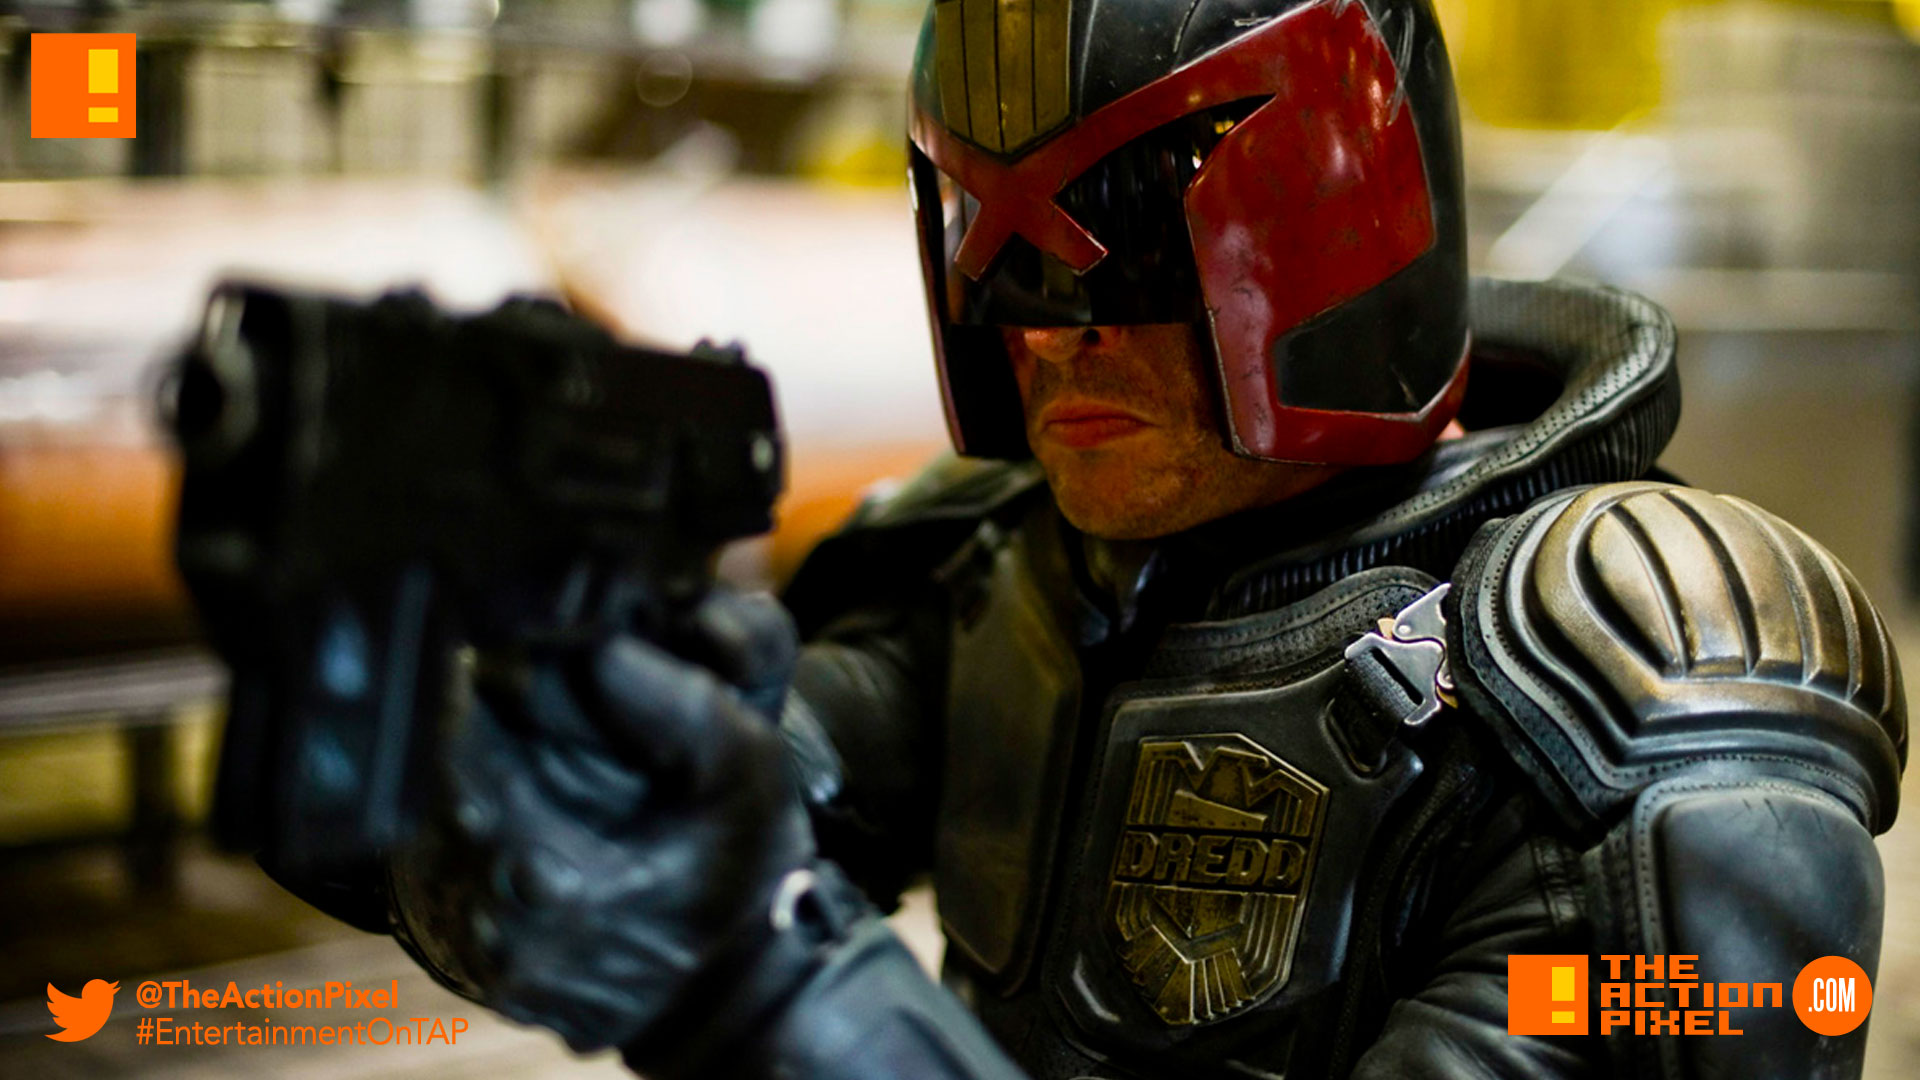 dredd, karl urban, the action pixel, 2000 AD, entertainment on tap,